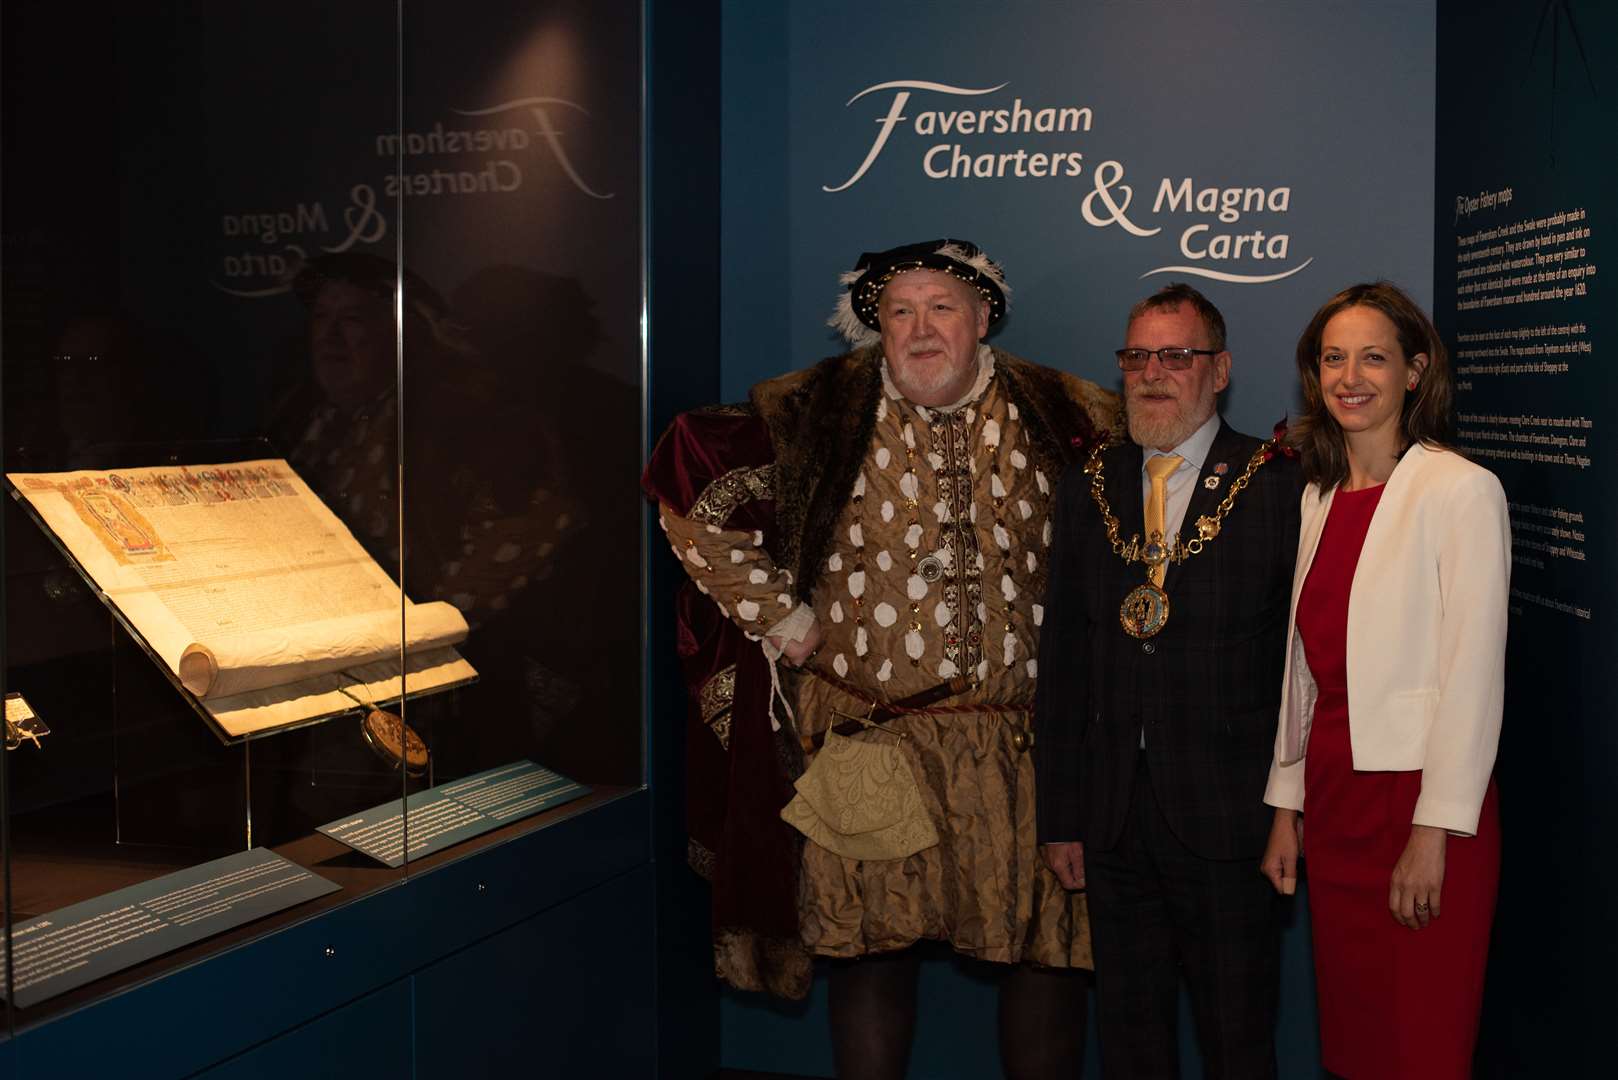 The exhibition launch at the town hall with Faversham Mayor Cllr Trevor Martin and MP Helen Whately